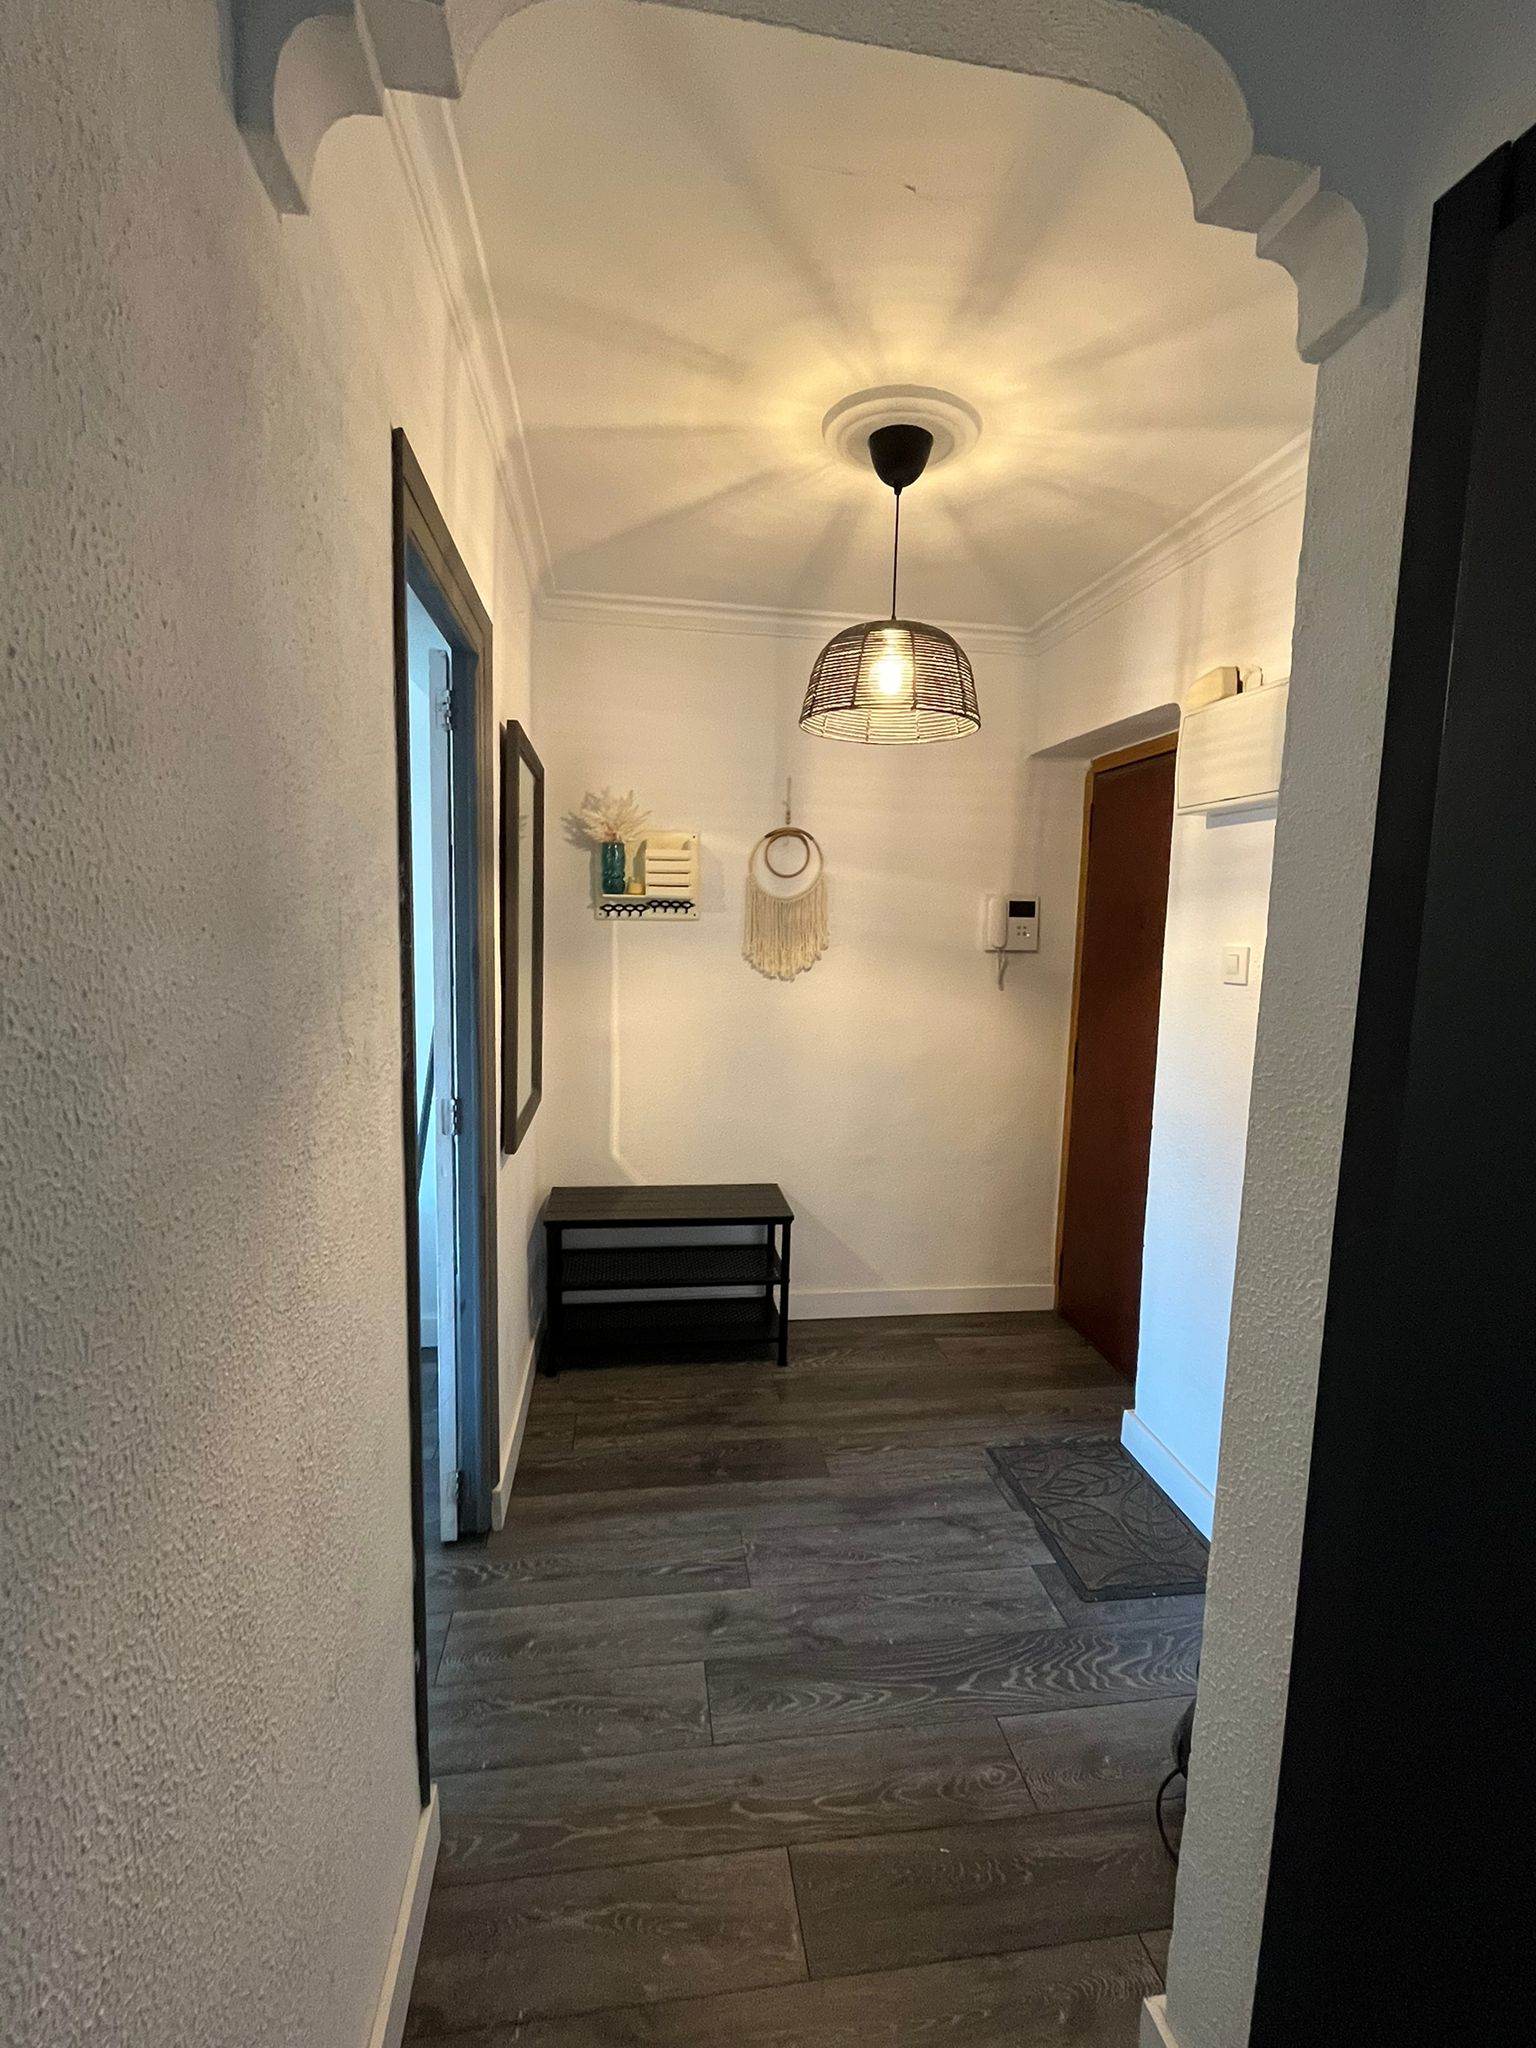 apartment for rent in valencia - hallway